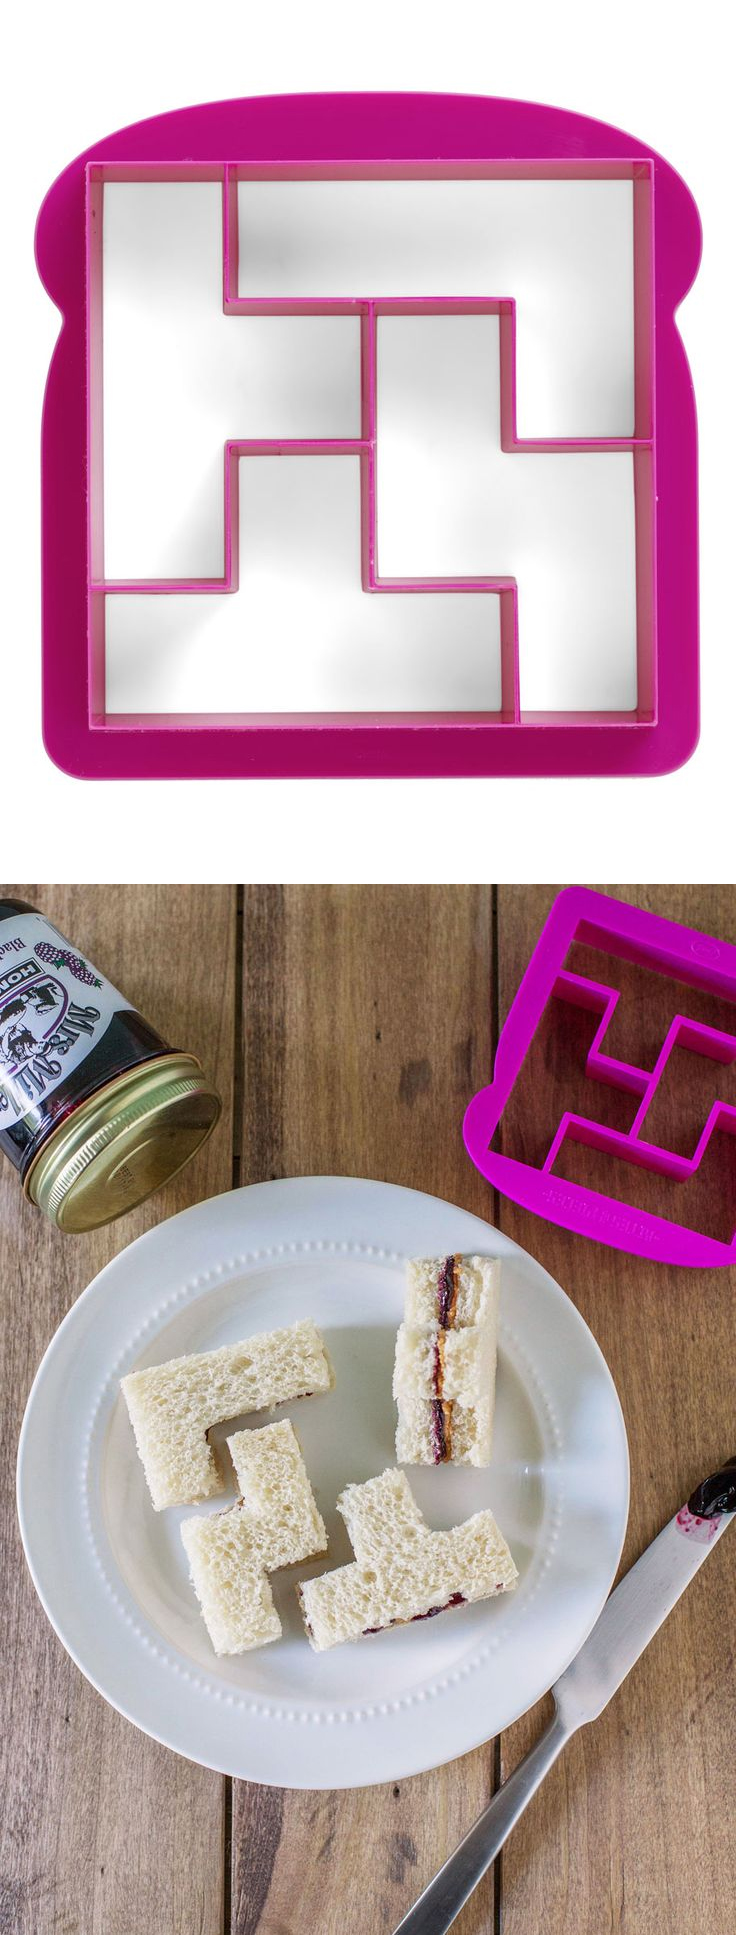 Tetris sandwich cutter - AWESOME! Bites and pieces #product_design